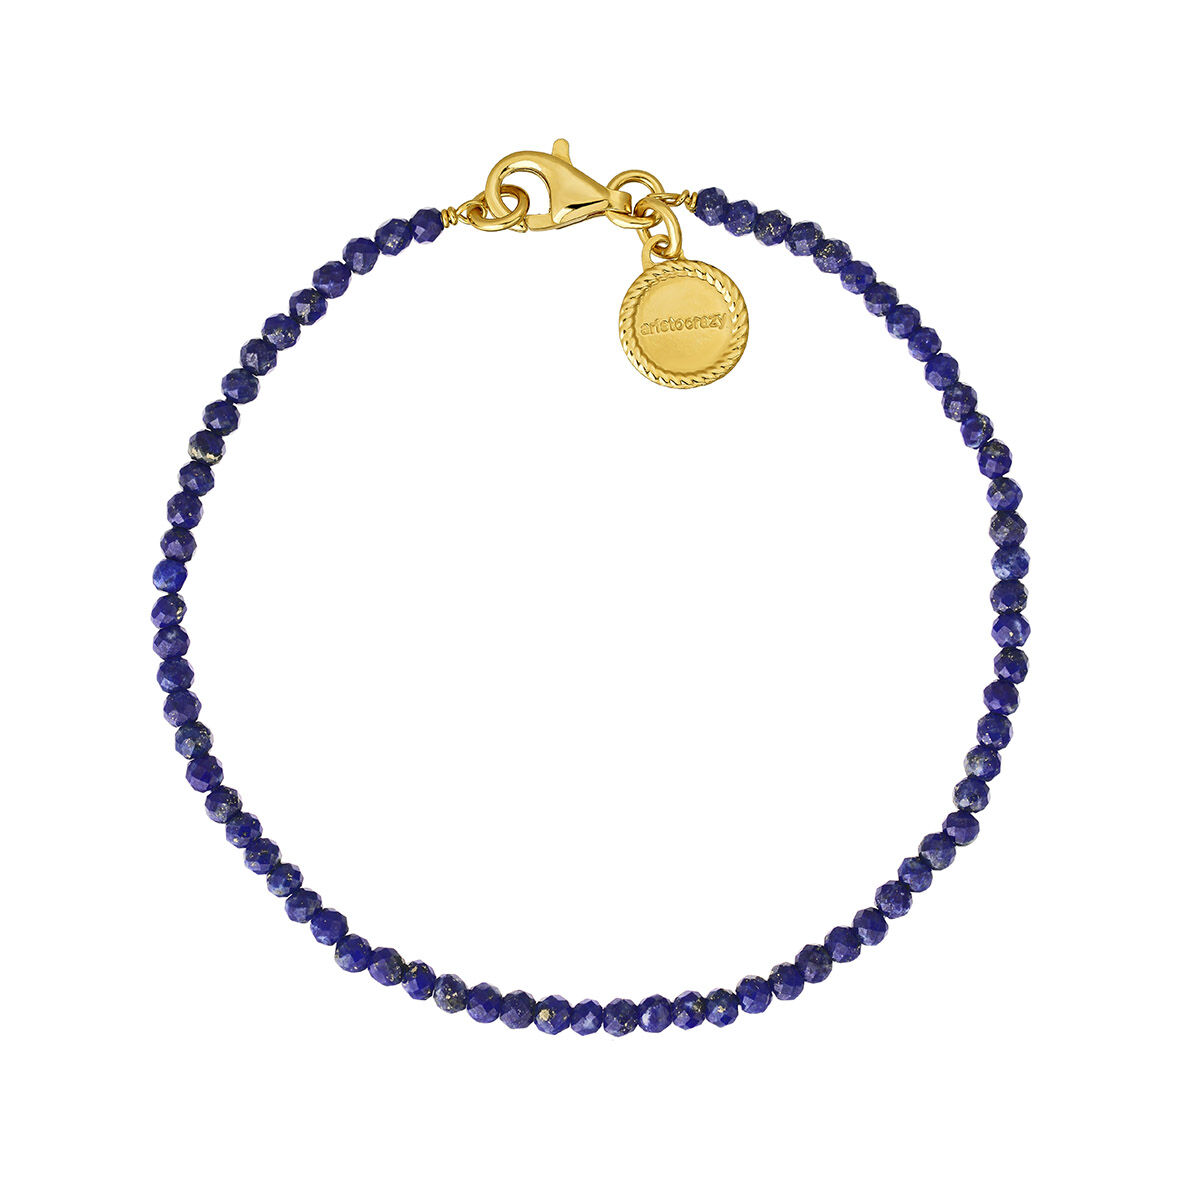 Bracelet in 18k yellow gold-plated silver with blue lapis lazuli stone beads, J04898-02-LP, hi-res